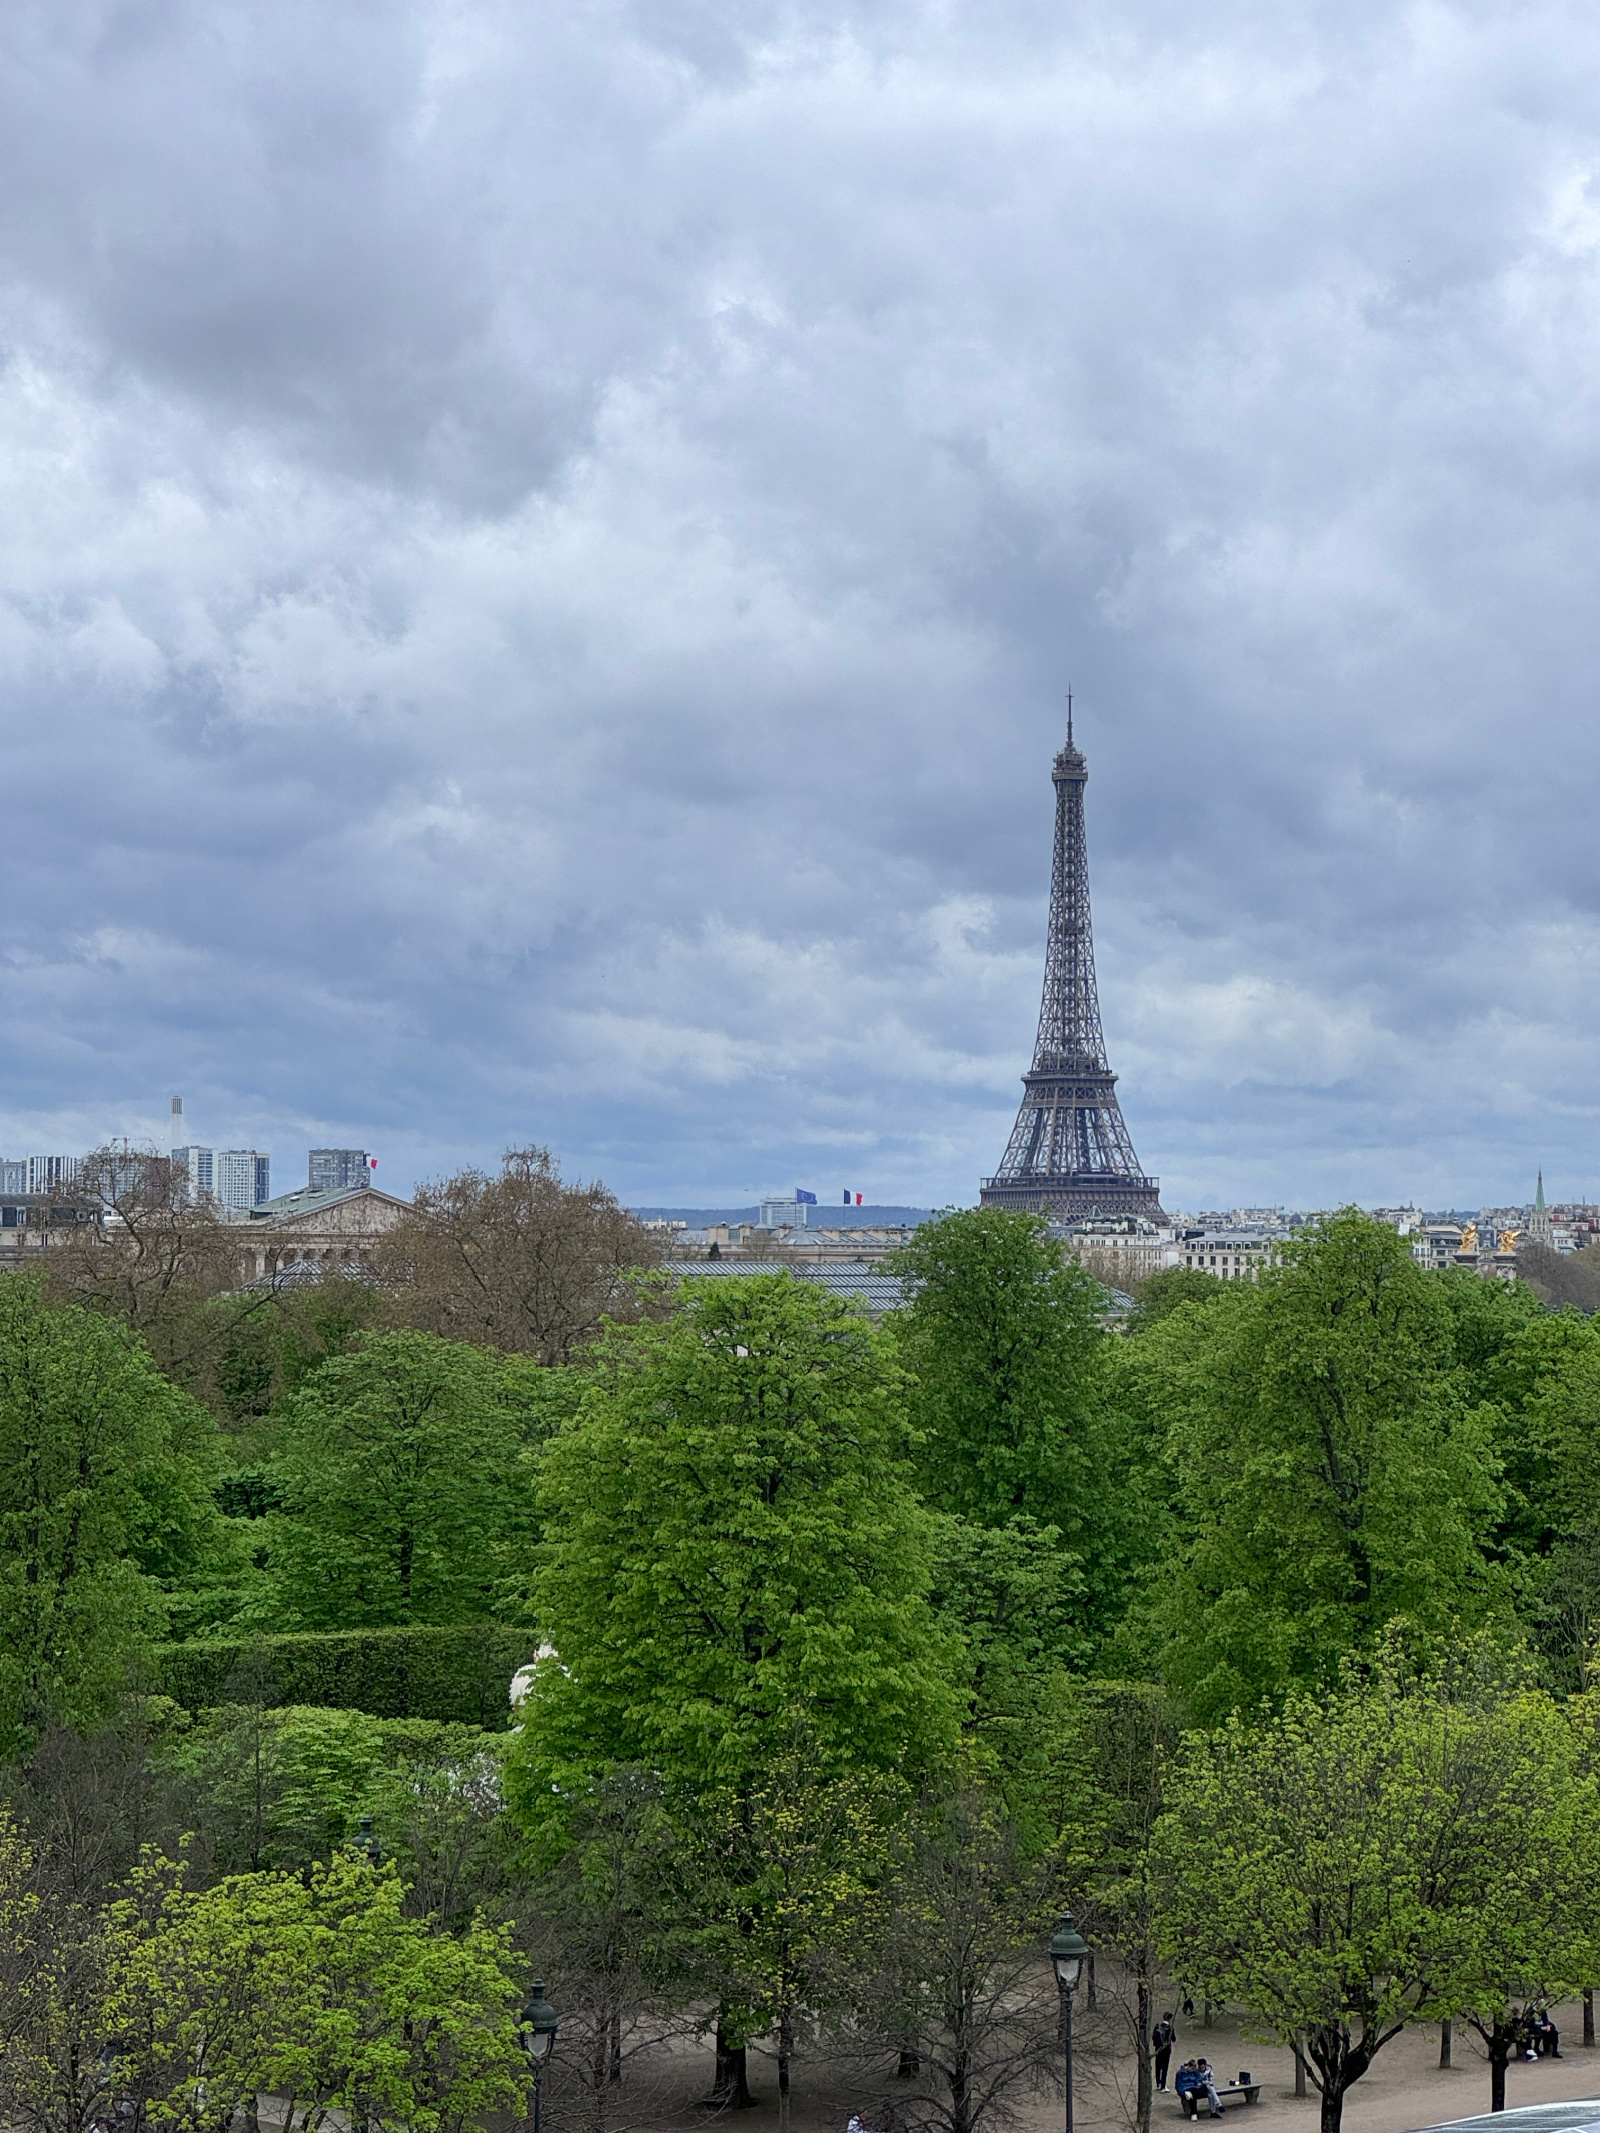 Hotels in Paris with Eiffel Tower Views